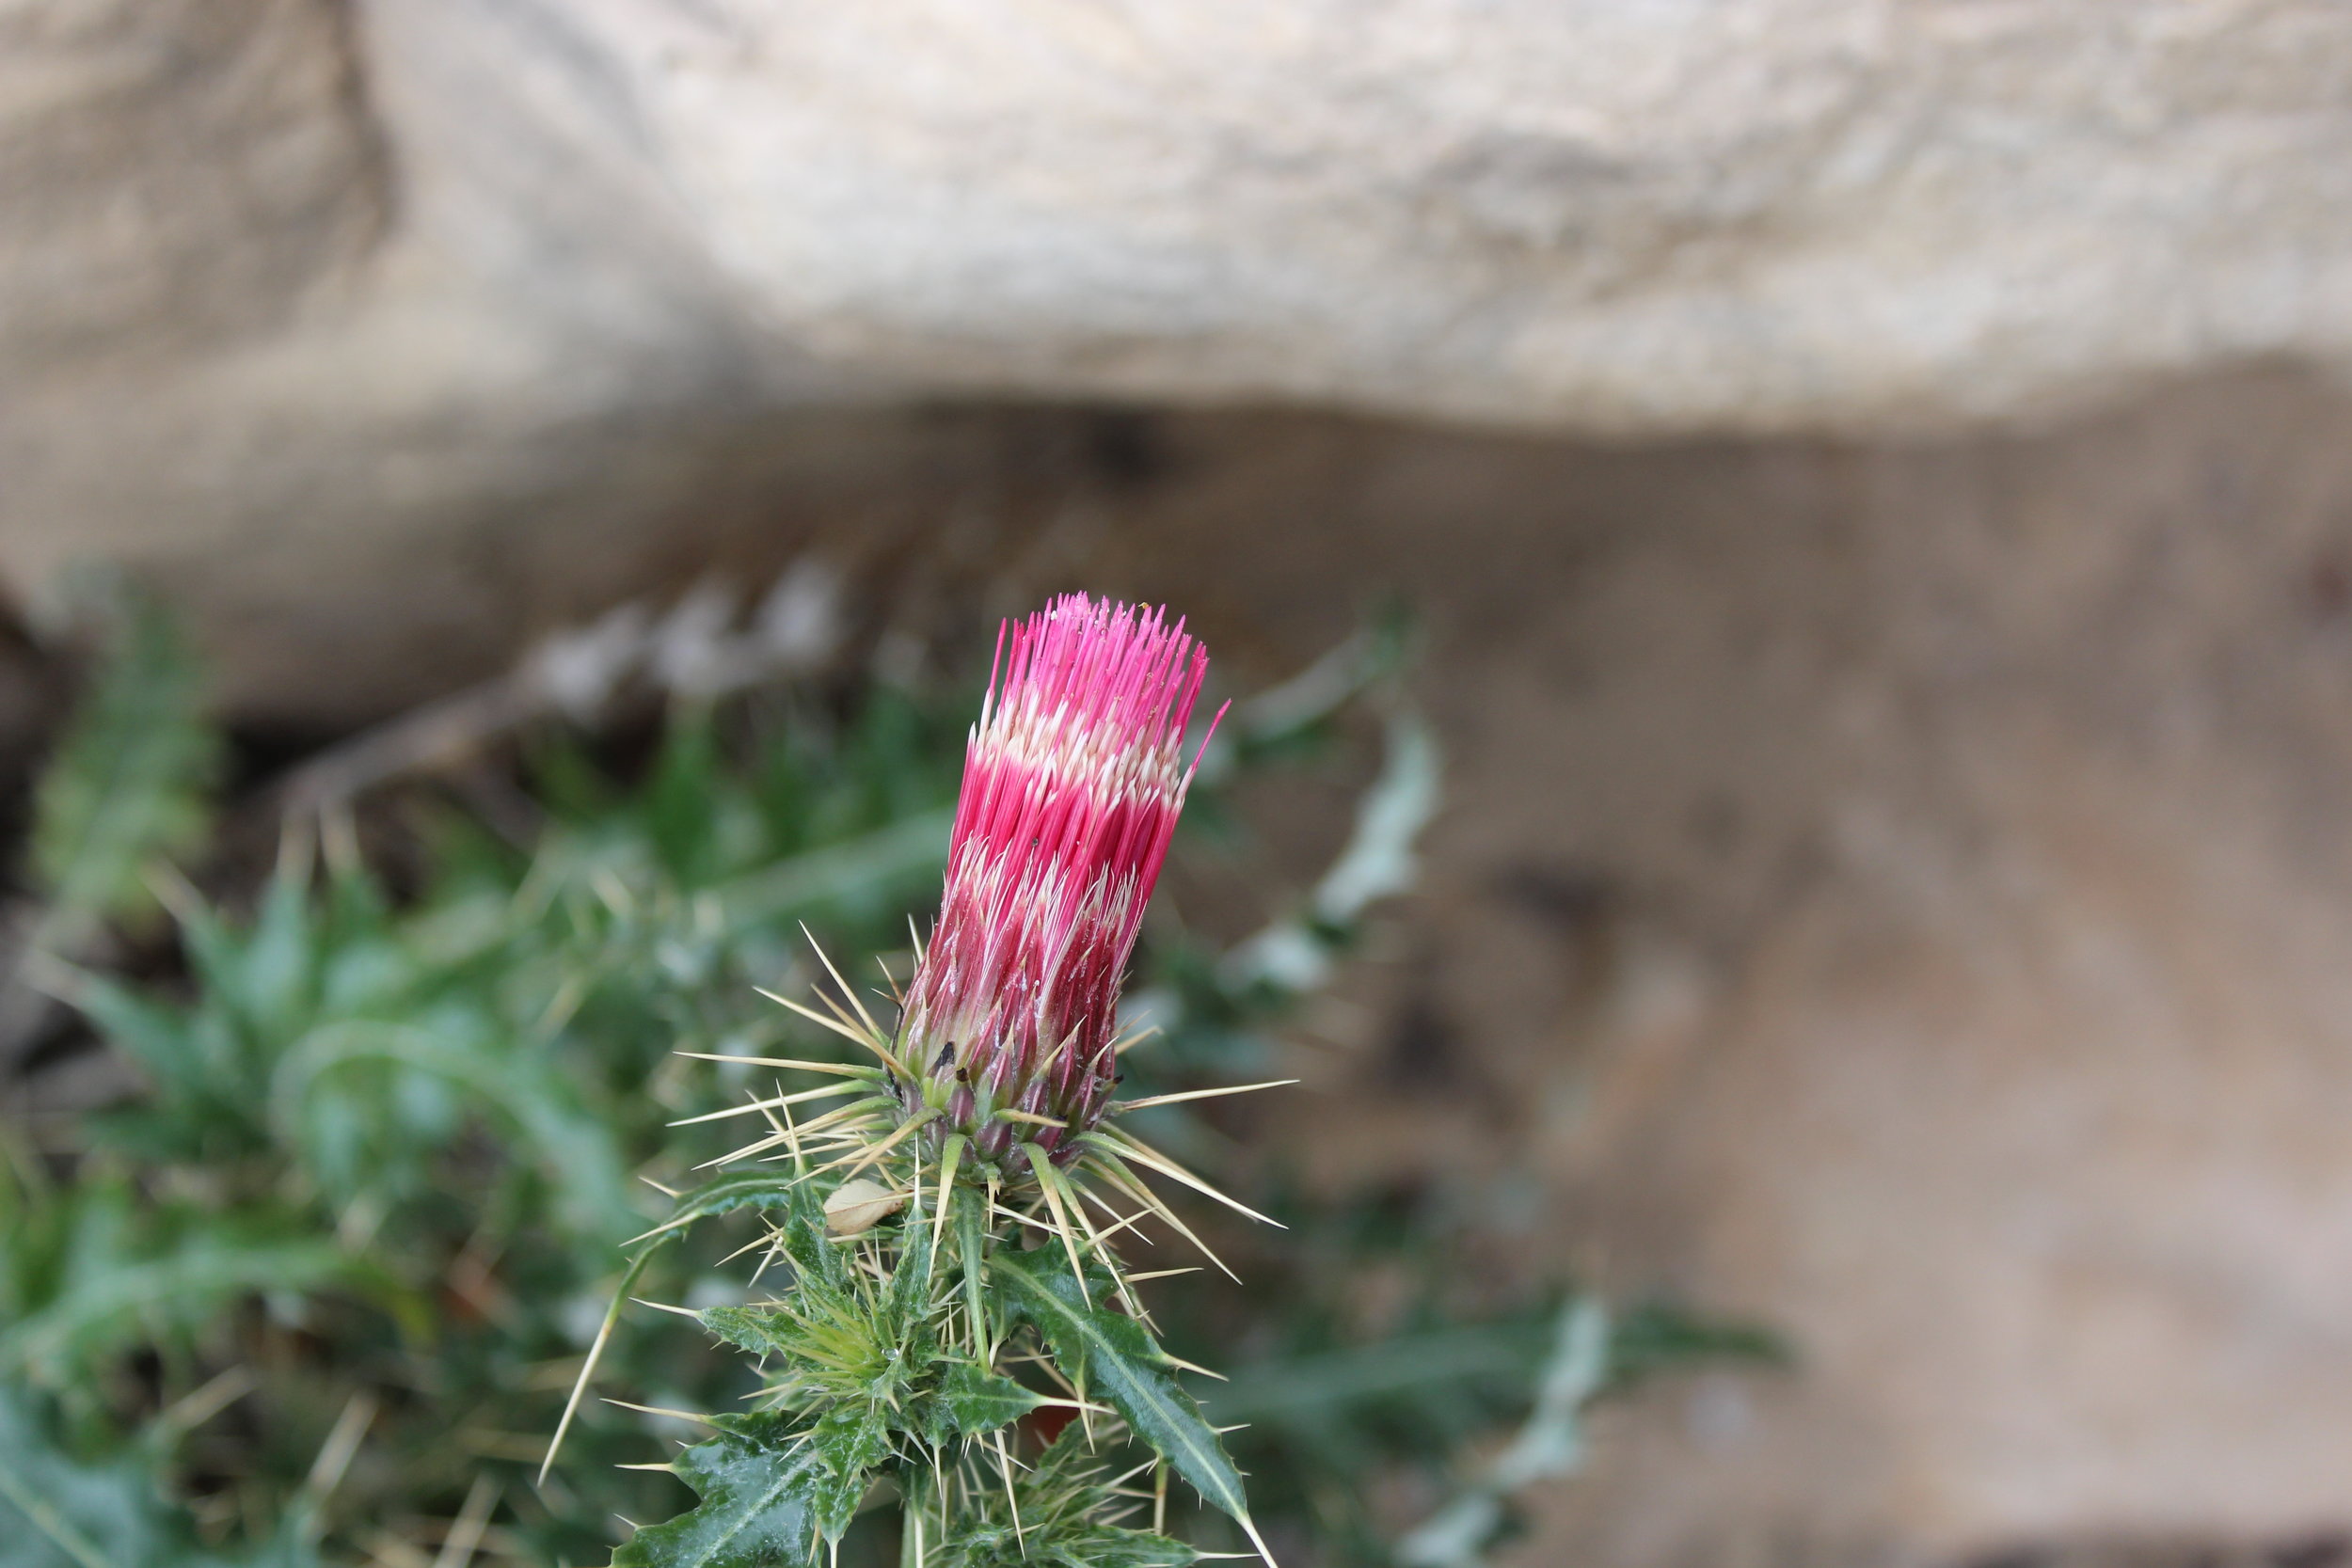 A thistle, likely non-native.